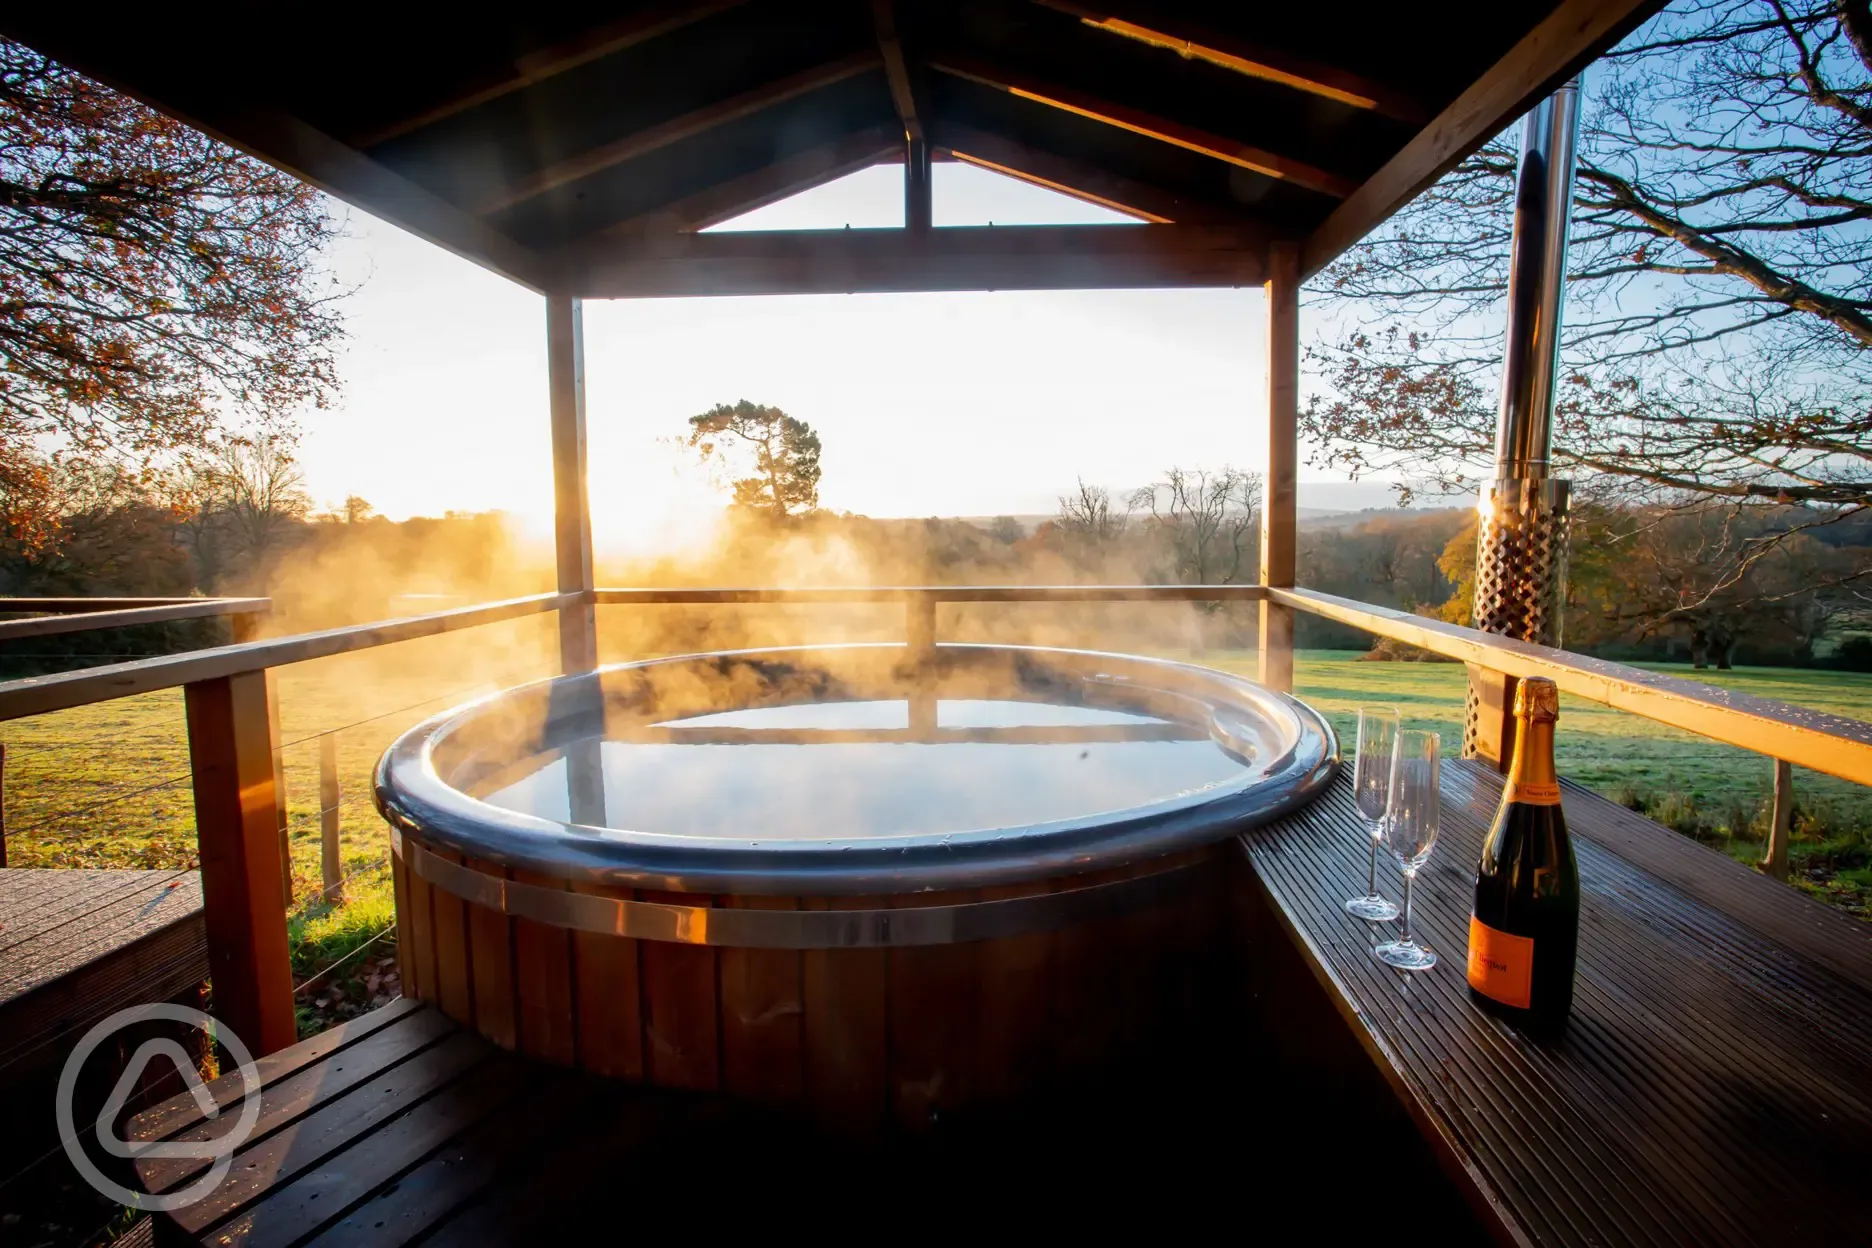 Glamping dome wood-fired hot tub